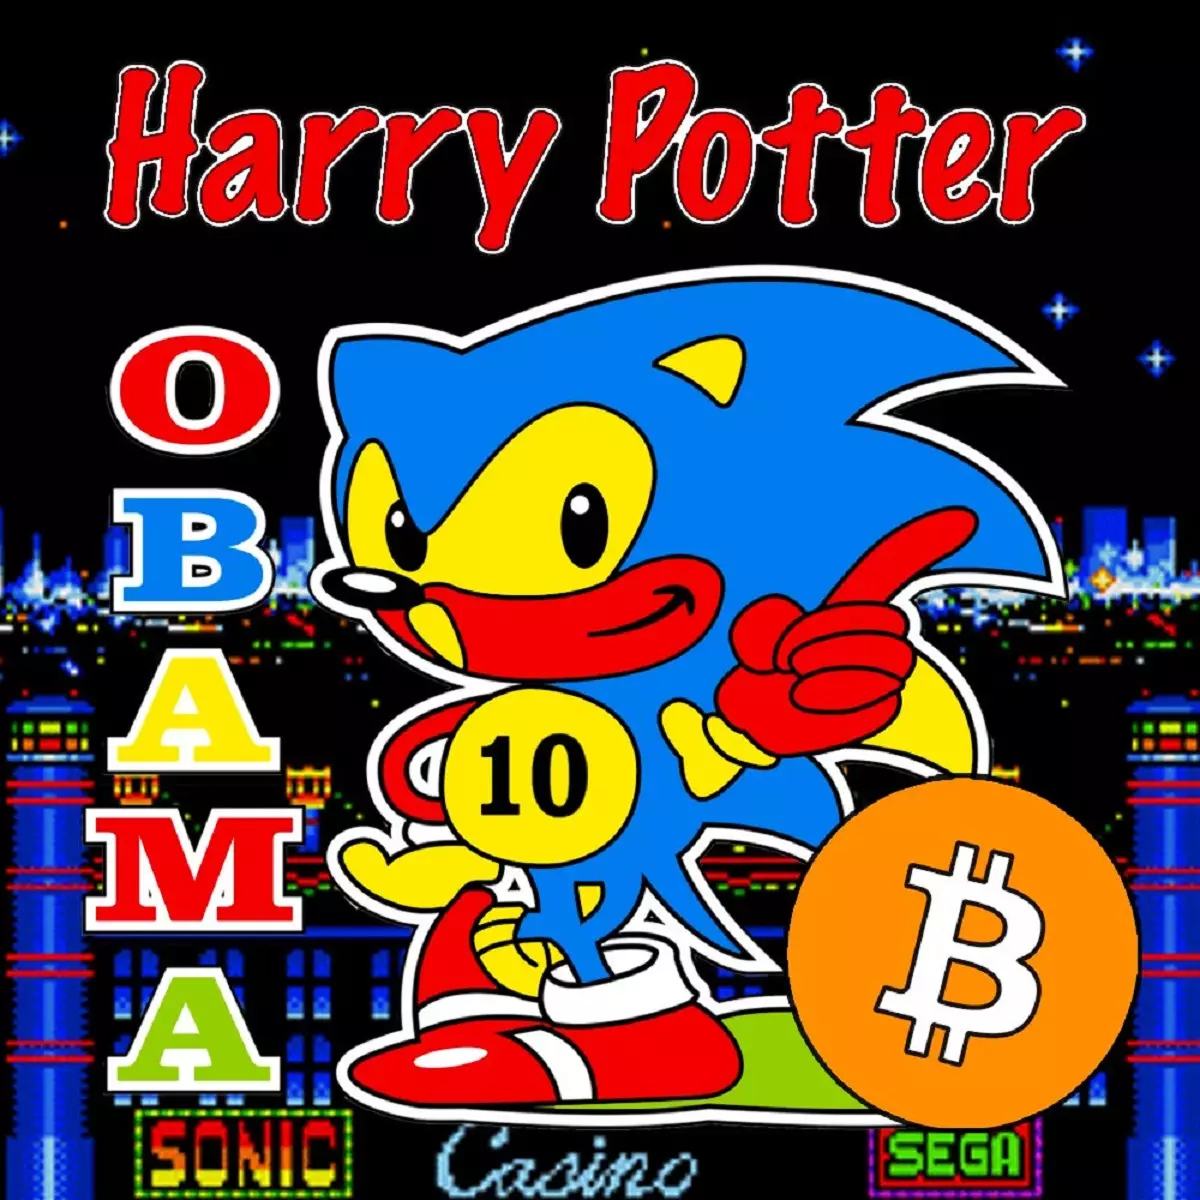 HarryPotterObamaSonic10Inu (BITCOIN) Sees Strong Rally Amidst Increasing On-Chain Activity